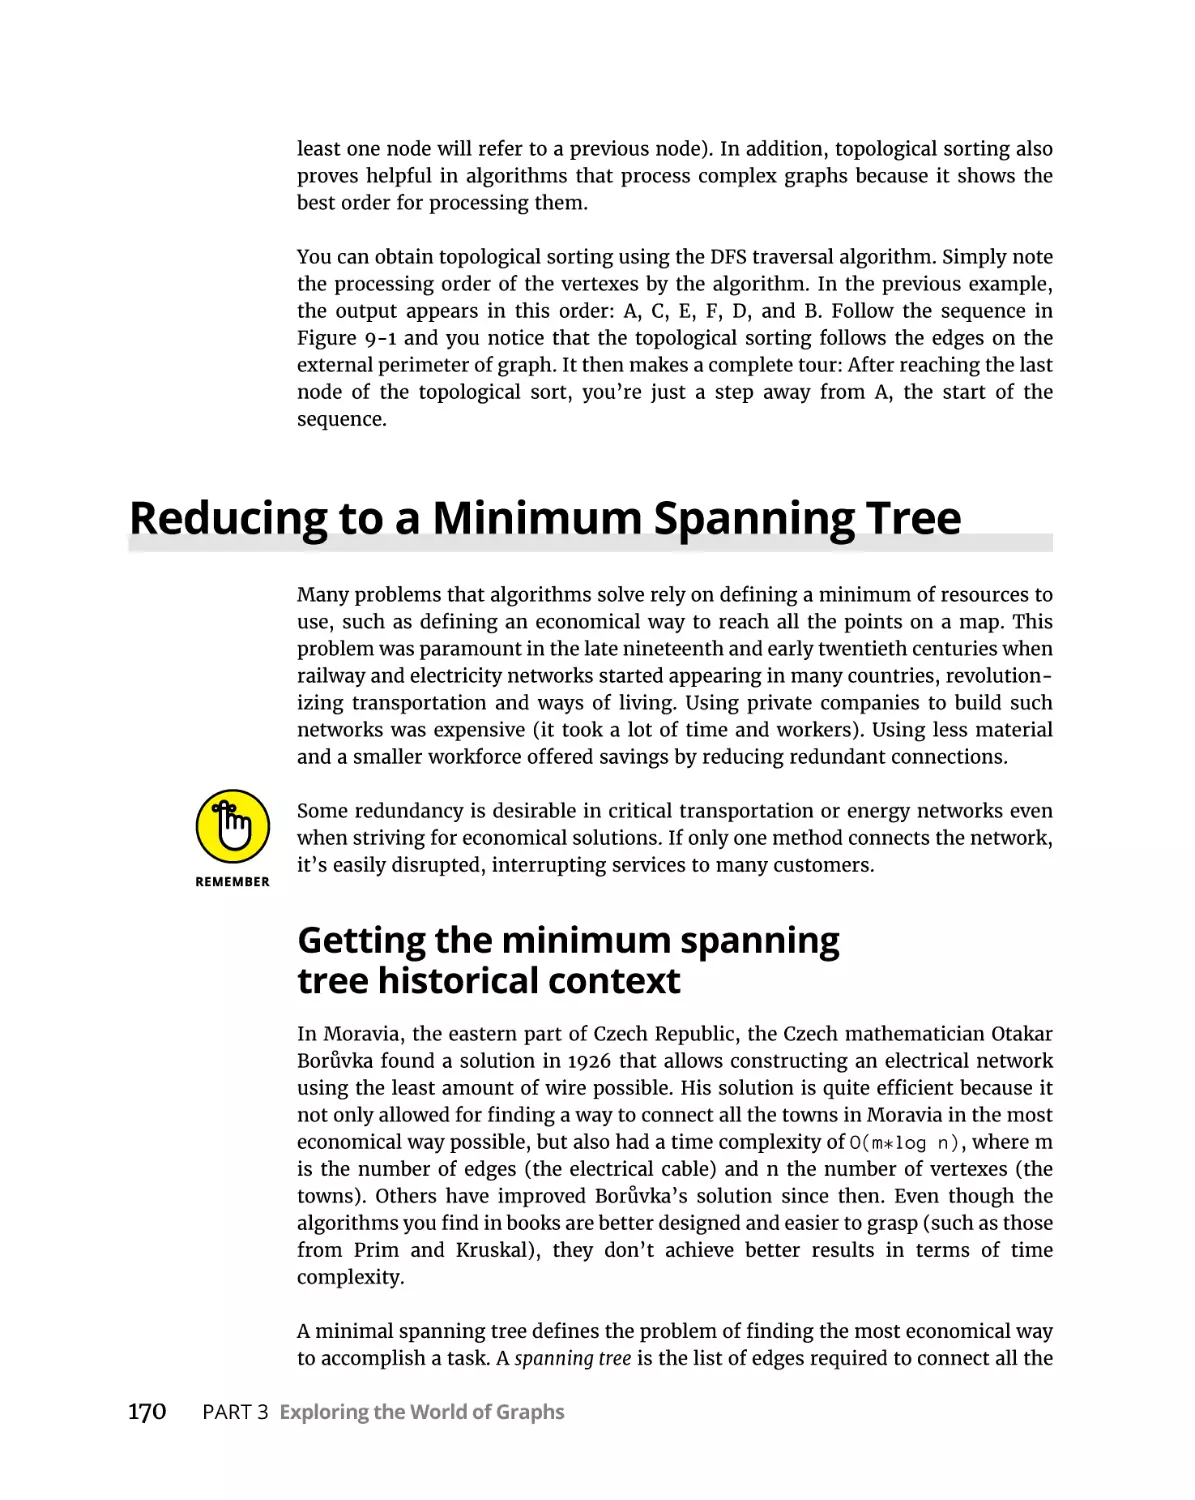 Reducing to a Minimum Spanning Tree
Getting the minimum spanning tree historical context